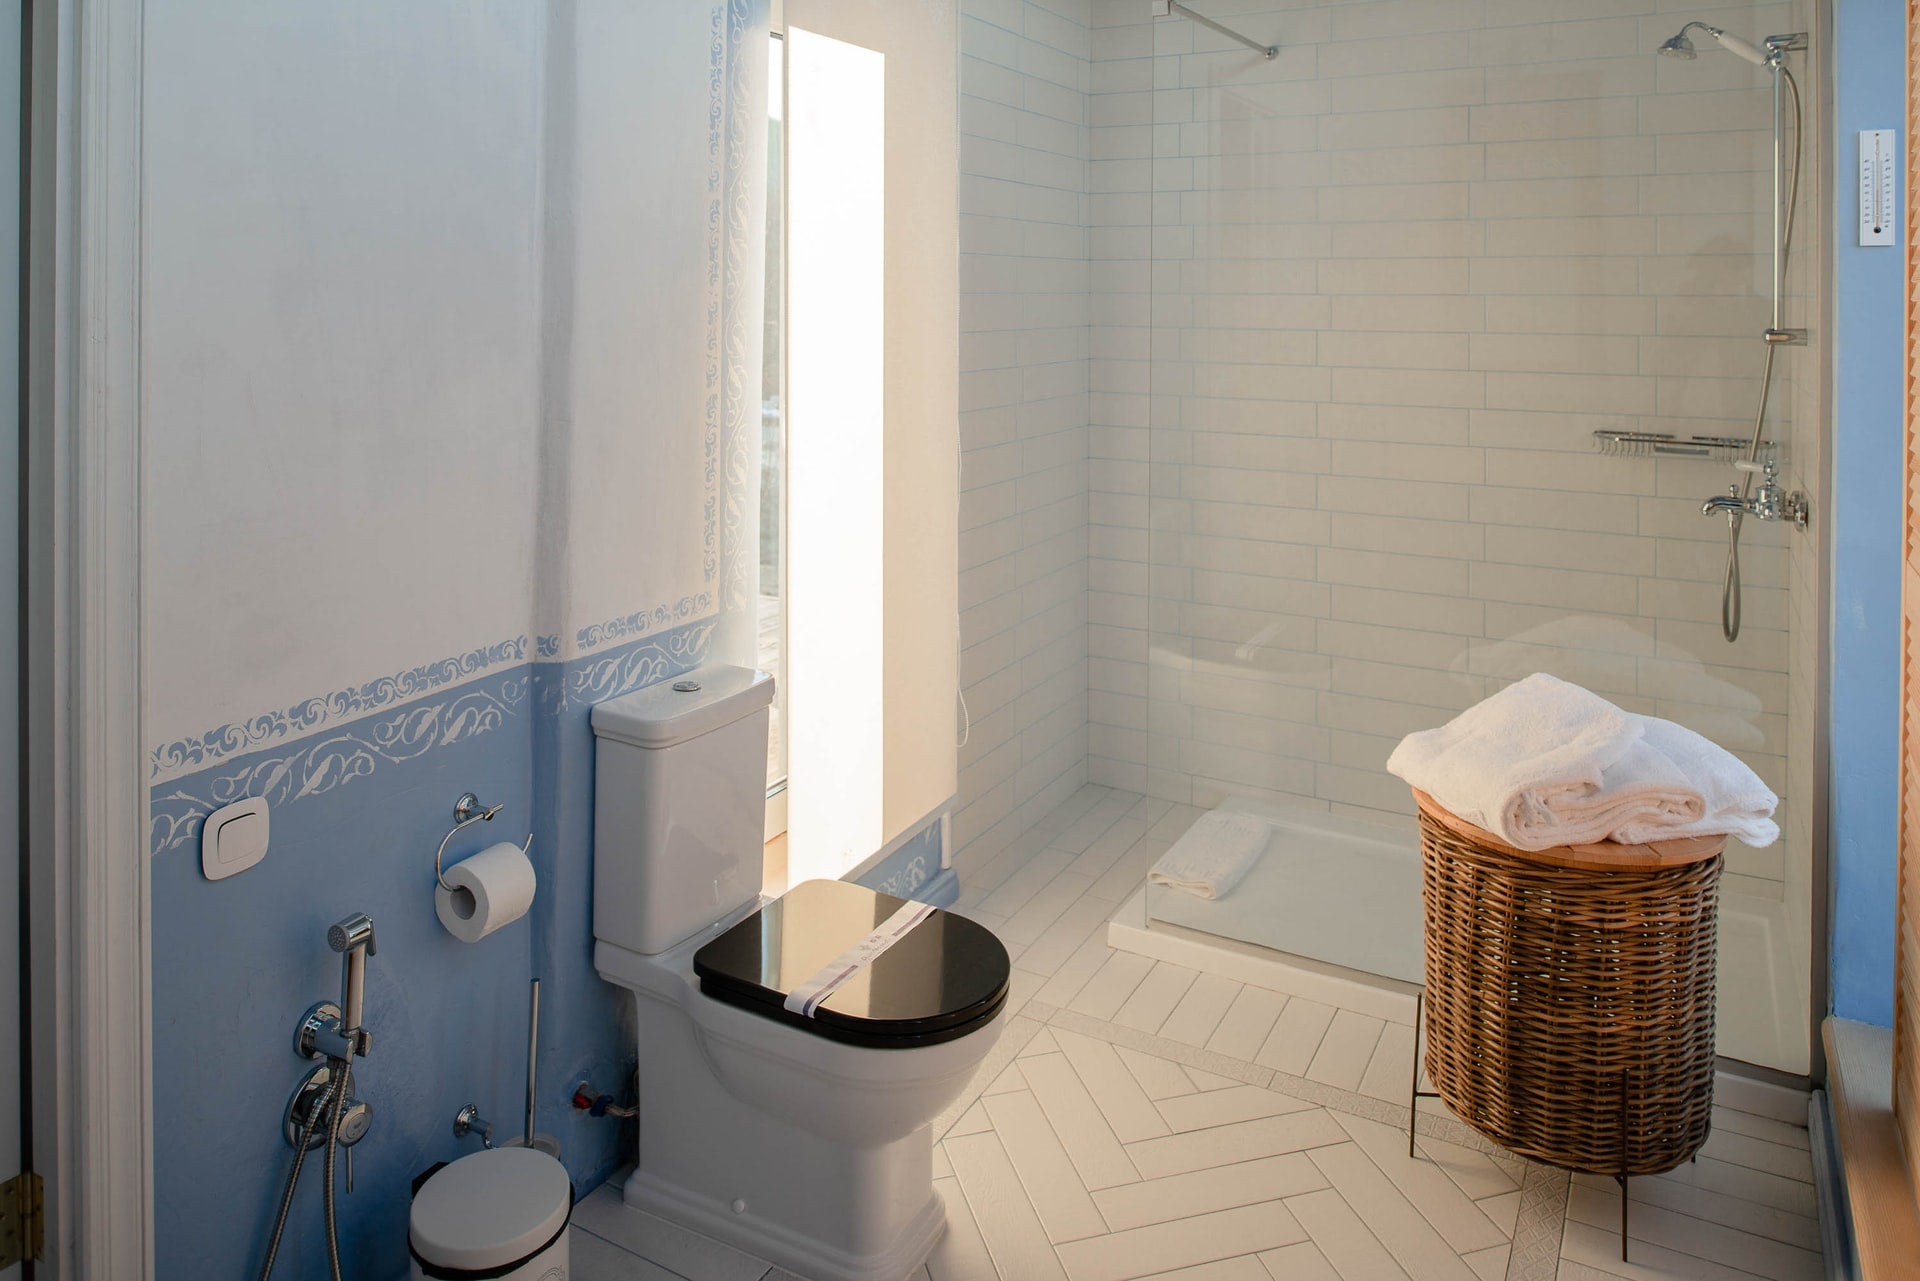 What Kind Of Tile Should You Use In A Small Bathroom?